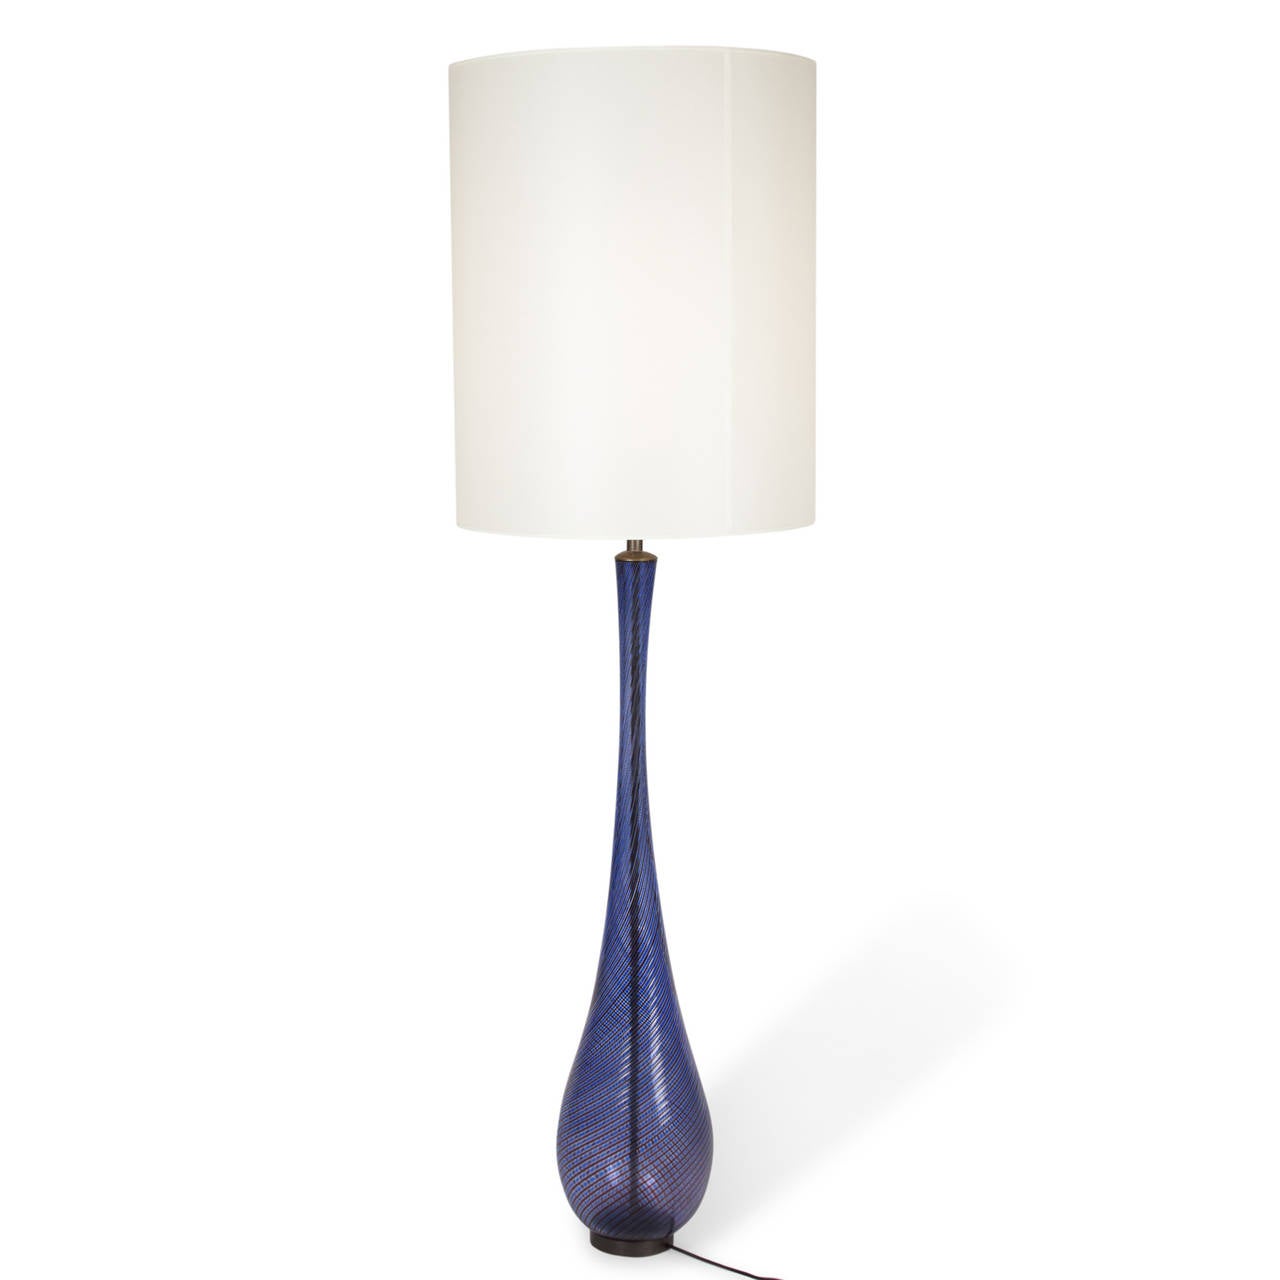 Dark blue swirl filigrana glass table lamp, the glass on circular bronze base, by Venini, Murano, Italy 1940s. In custom silk shade. Measures: 7 in. D, 54 in. H, 16 1/8 in. D shade at widest. 
 